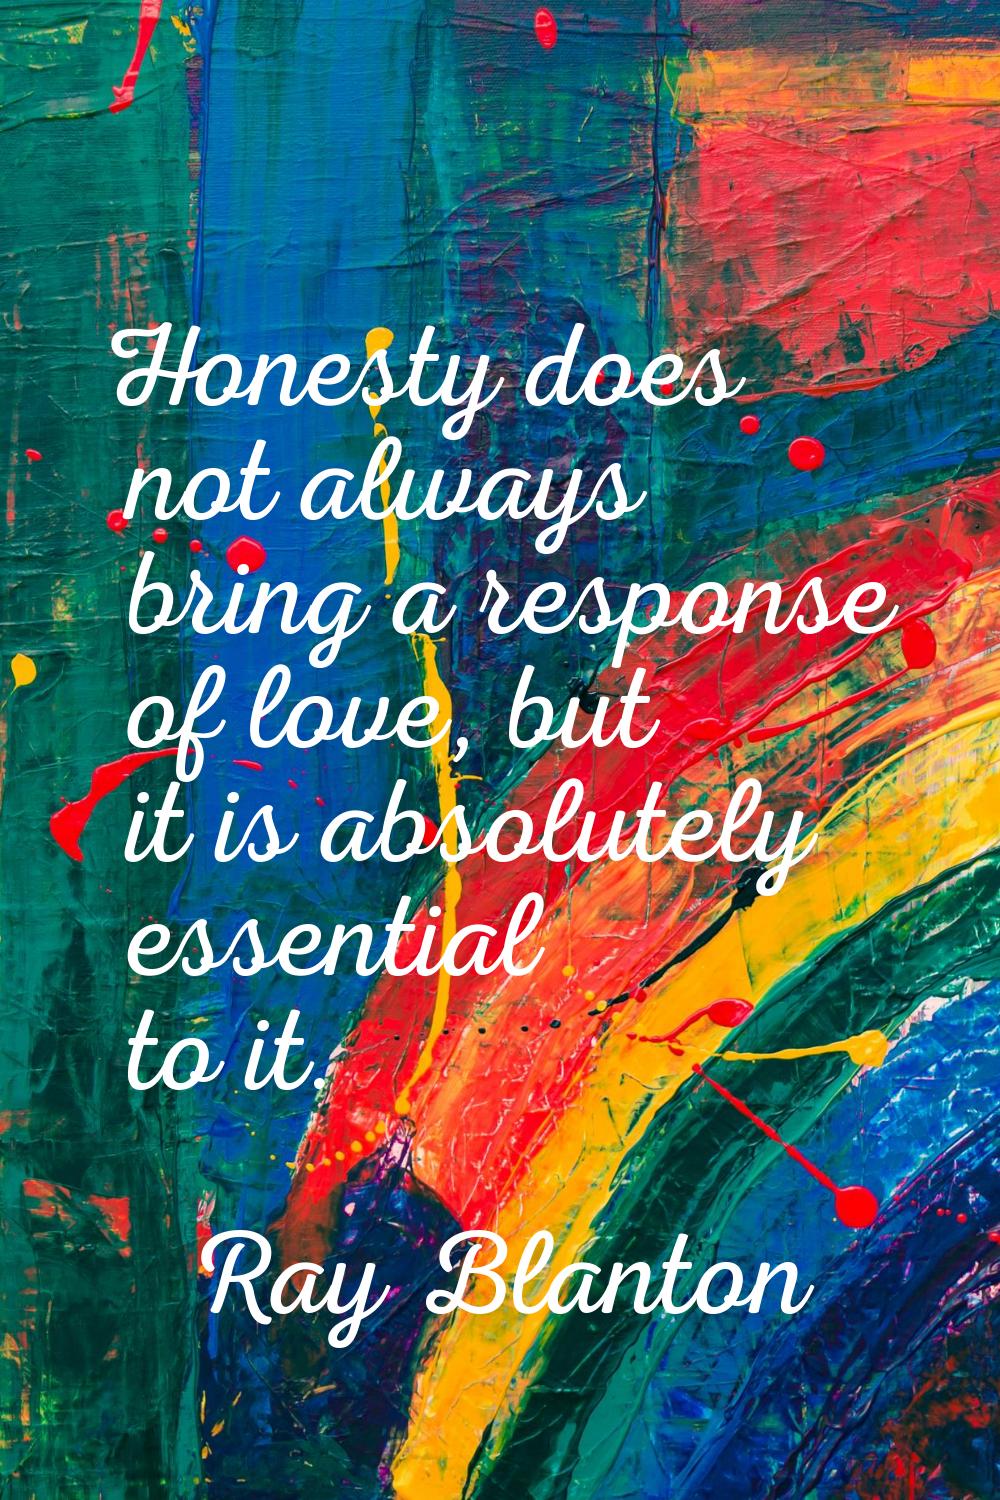 Honesty does not always bring a response of love, but it is absolutely essential to it.